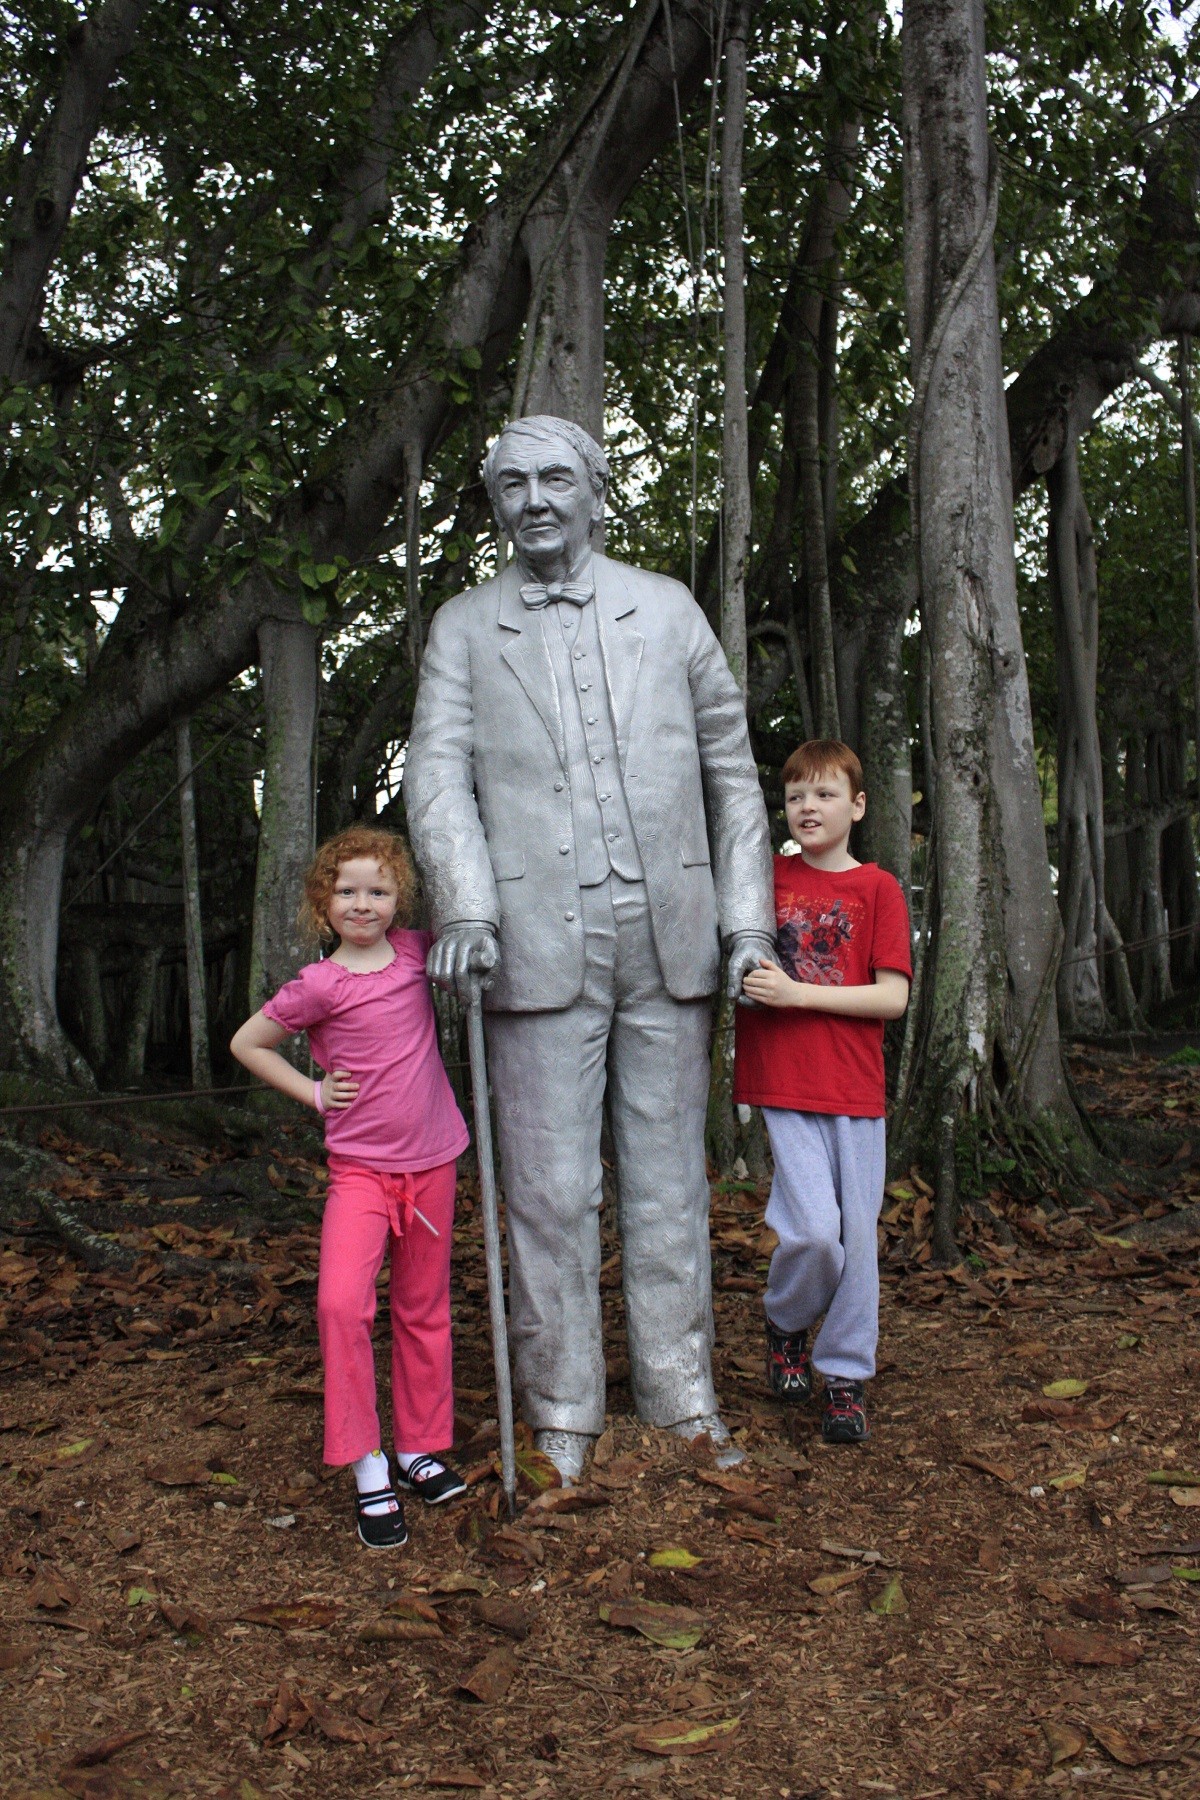 Is this the end of Family Road trips - Edison & Ford Winter Estates -Photo Credit Jennifer Merrick